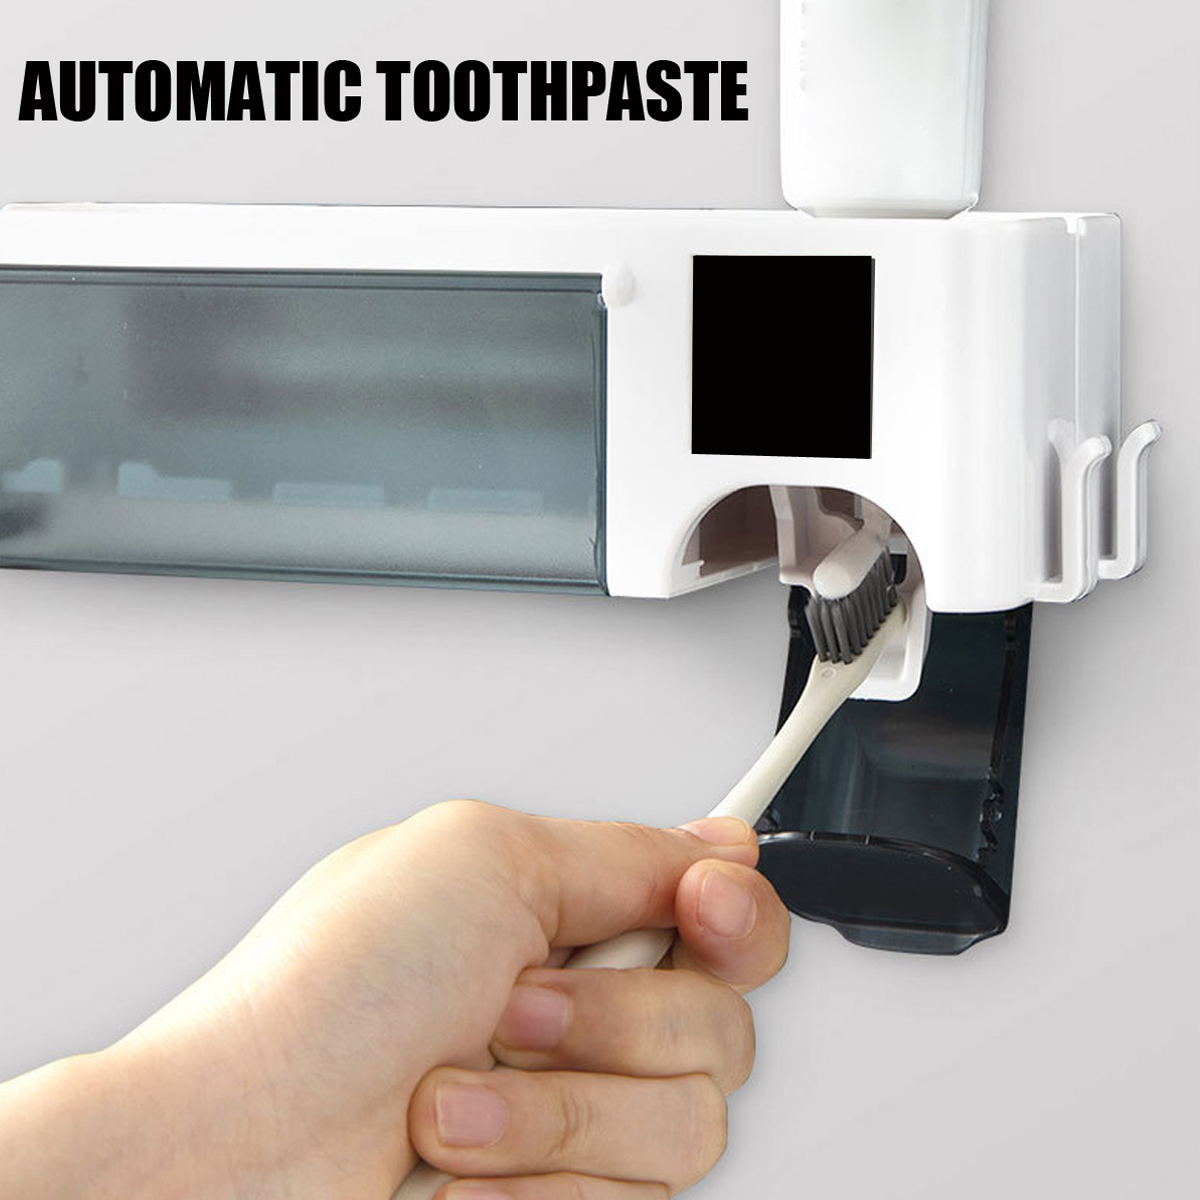 Ultraviolet-Electric-Toothbrush-Sterilizer-Wall-Mount-Toothbrush-Storage-Holder-Automatic-Toothpaste-1681238-5